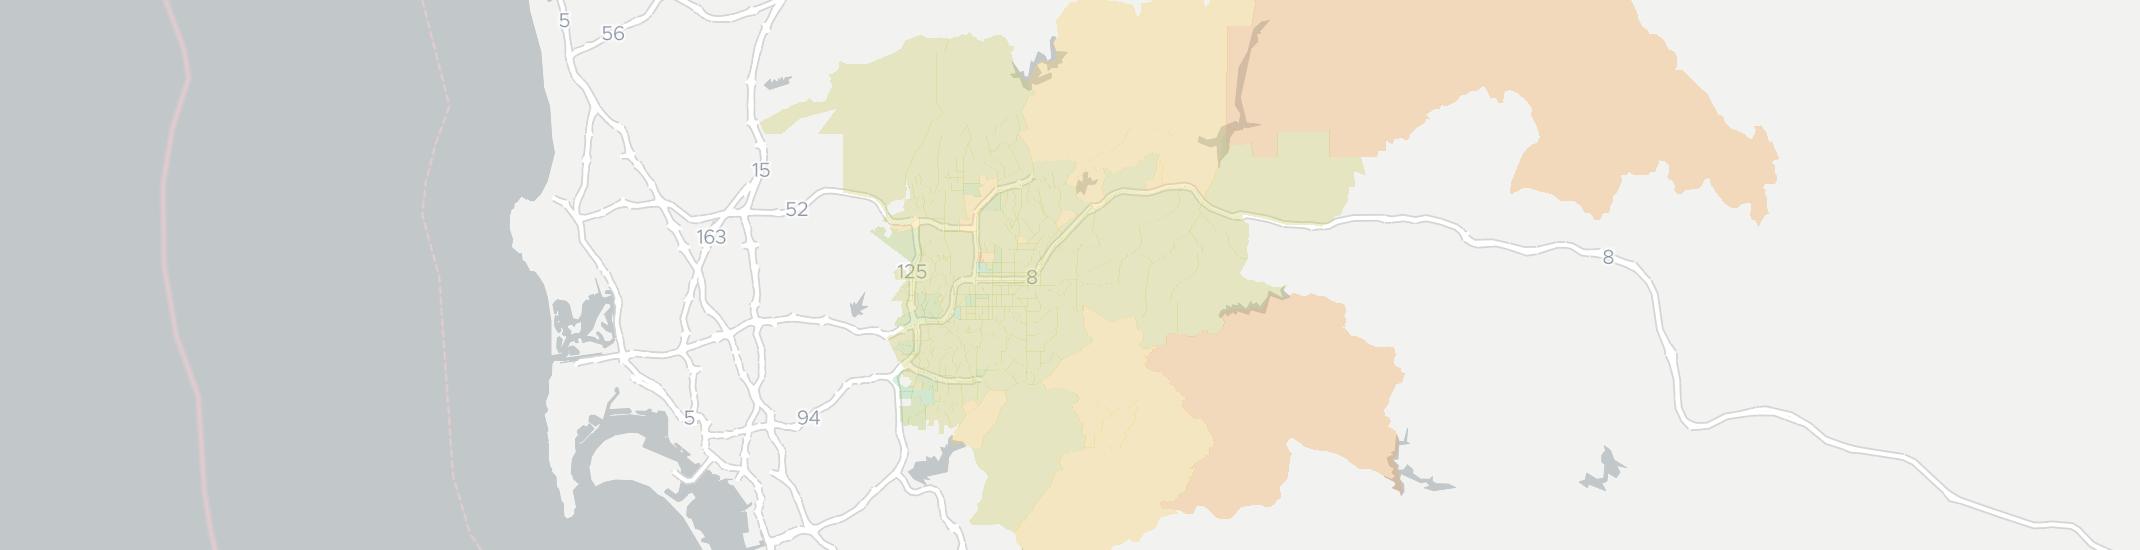 El Cajon Internet Competition Map. Click for interactive map.